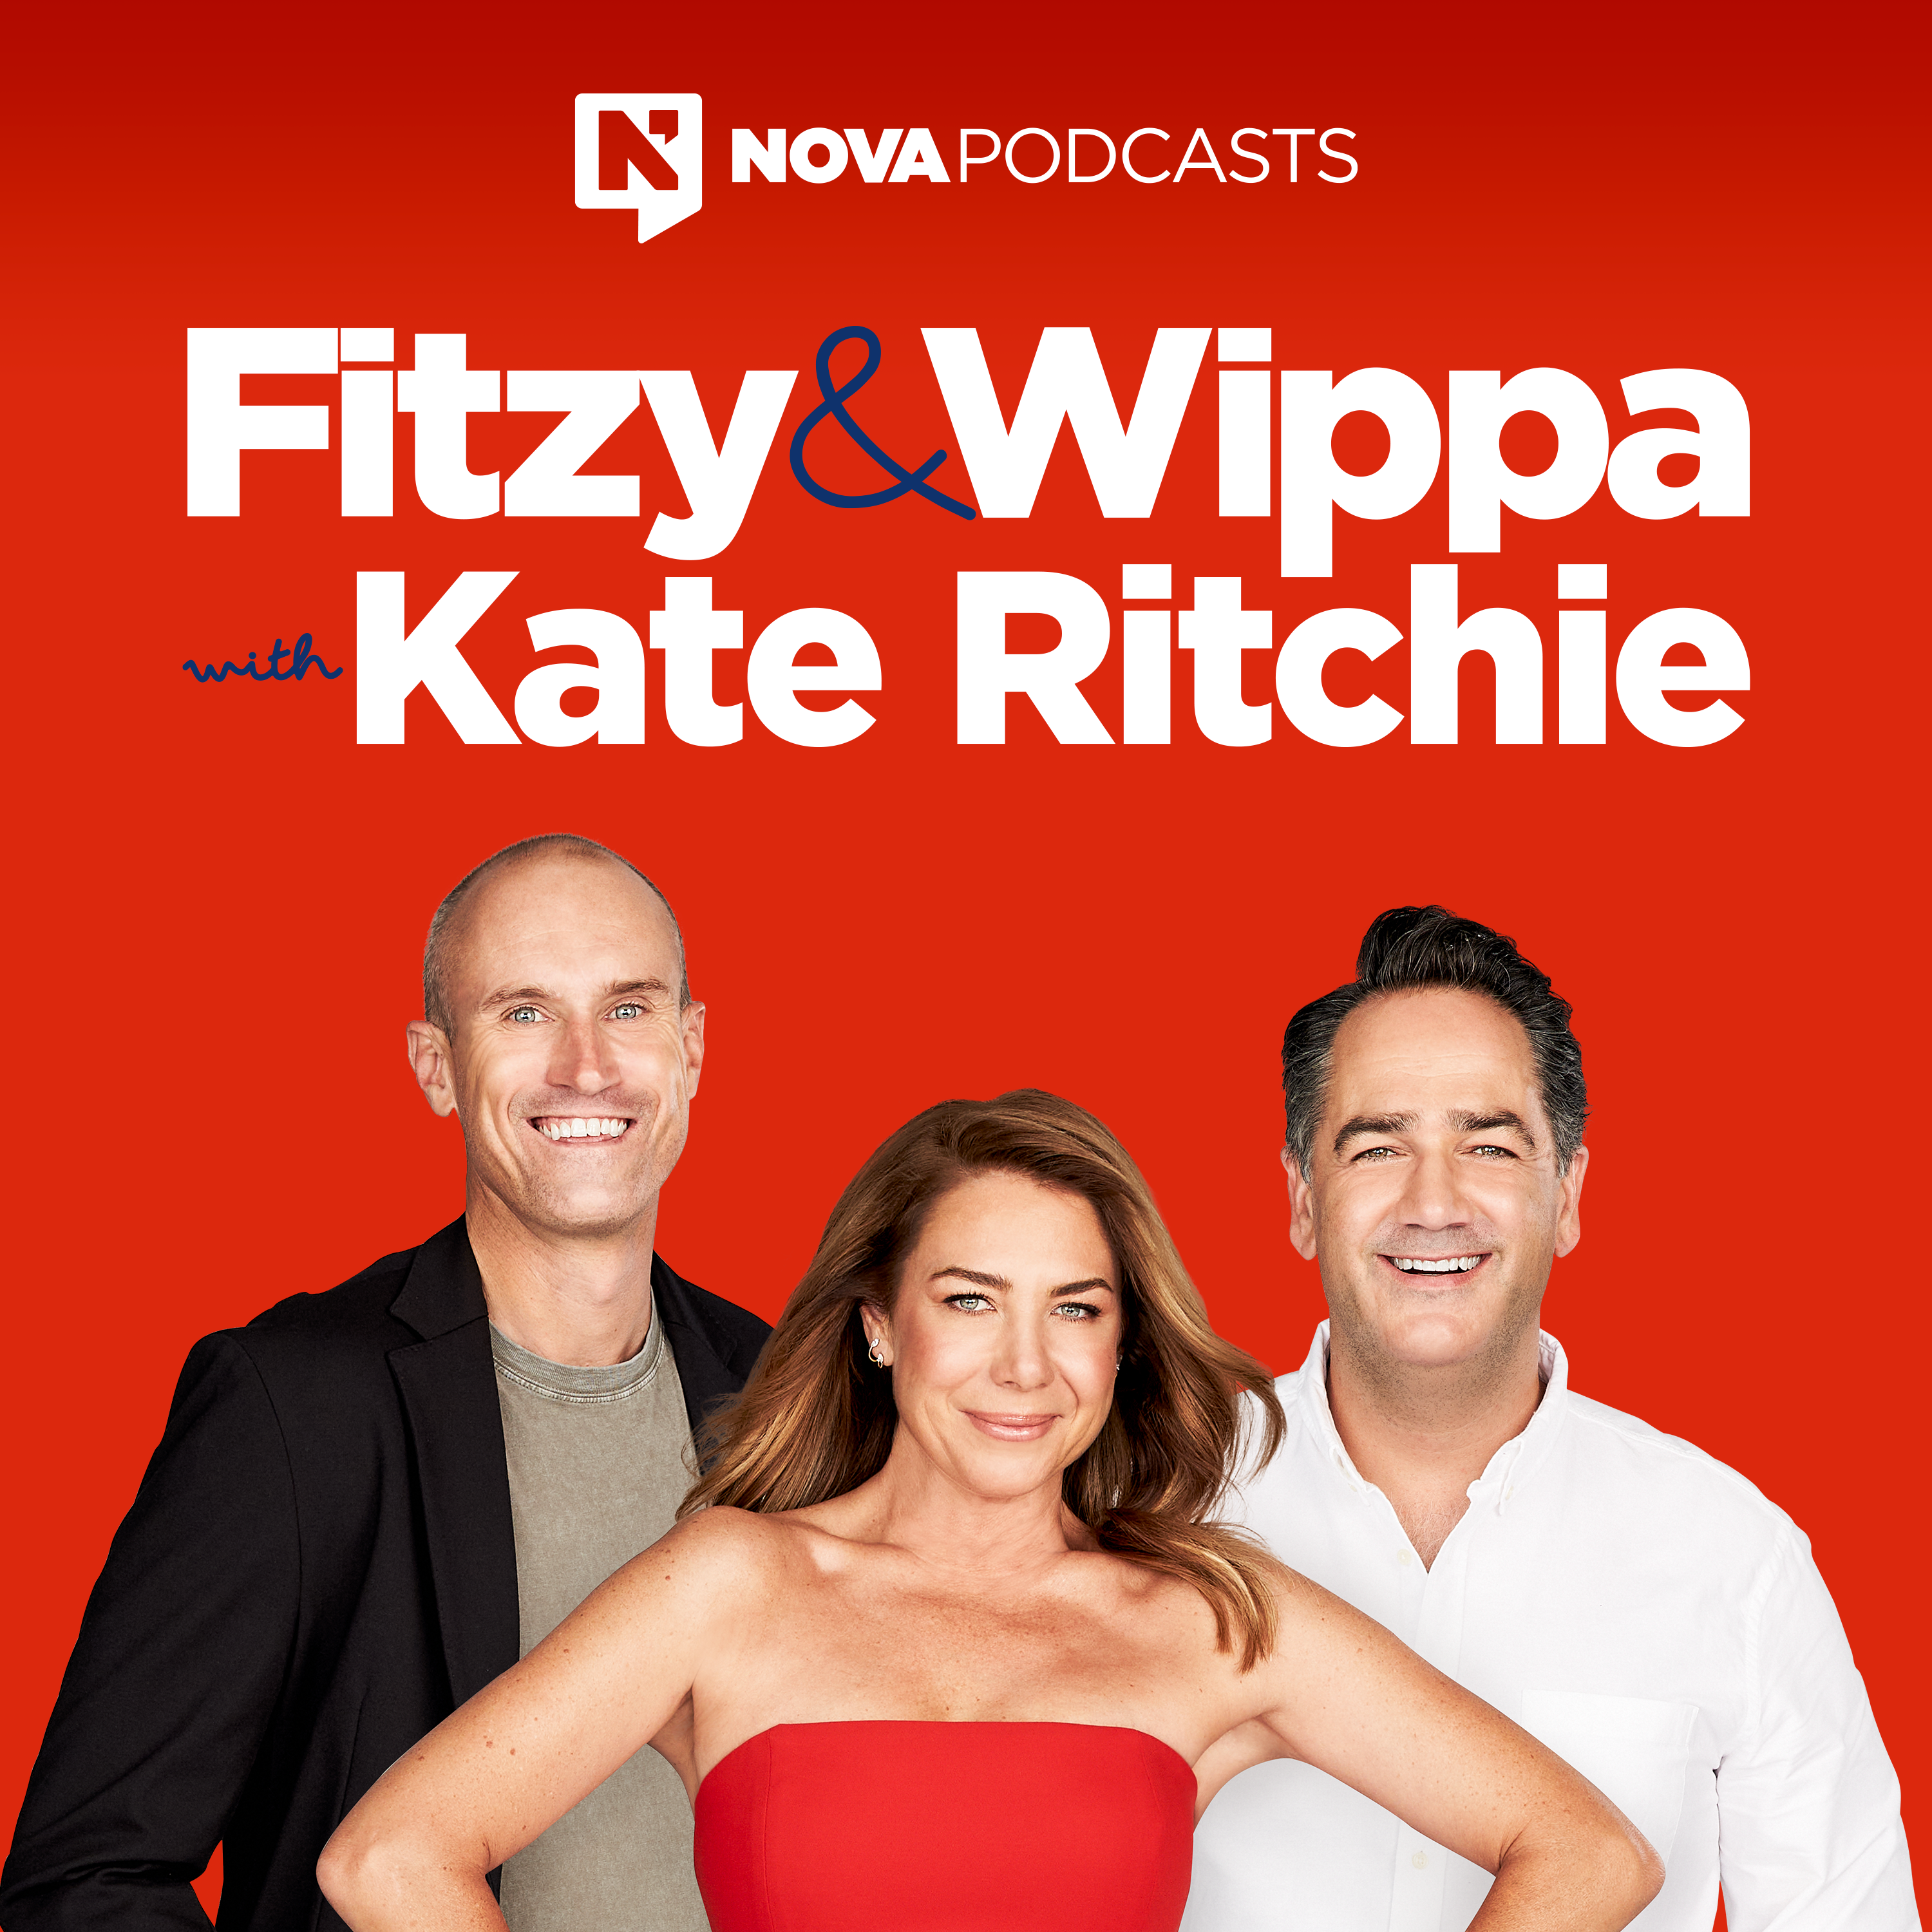 EXTRA - Vanilla Ice SLAYS Fitzy & Wippa in the ultimate Rap Battle